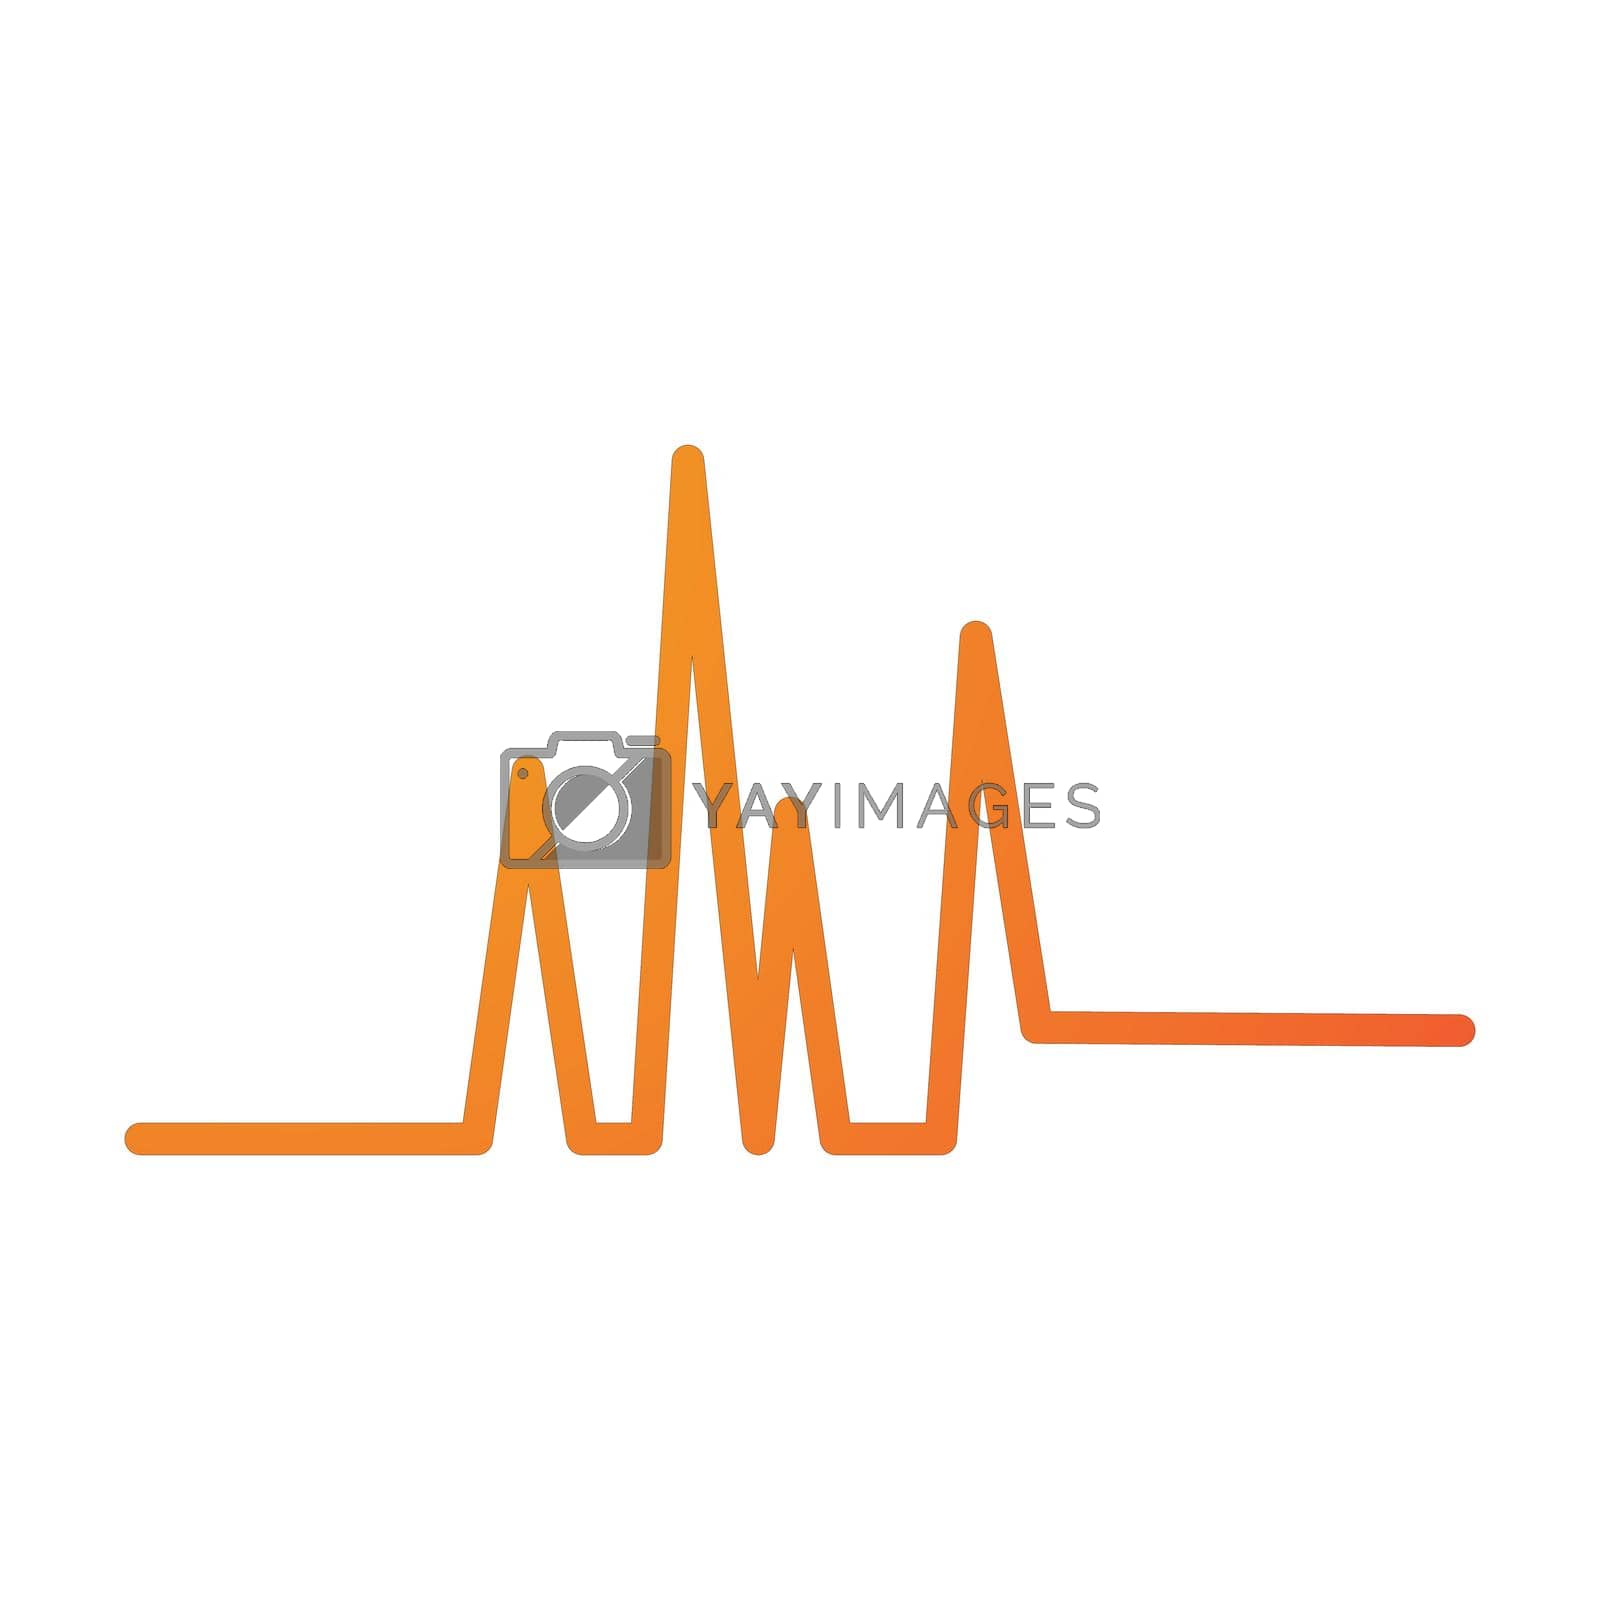 Royalty free image of sound wave music logo by awk